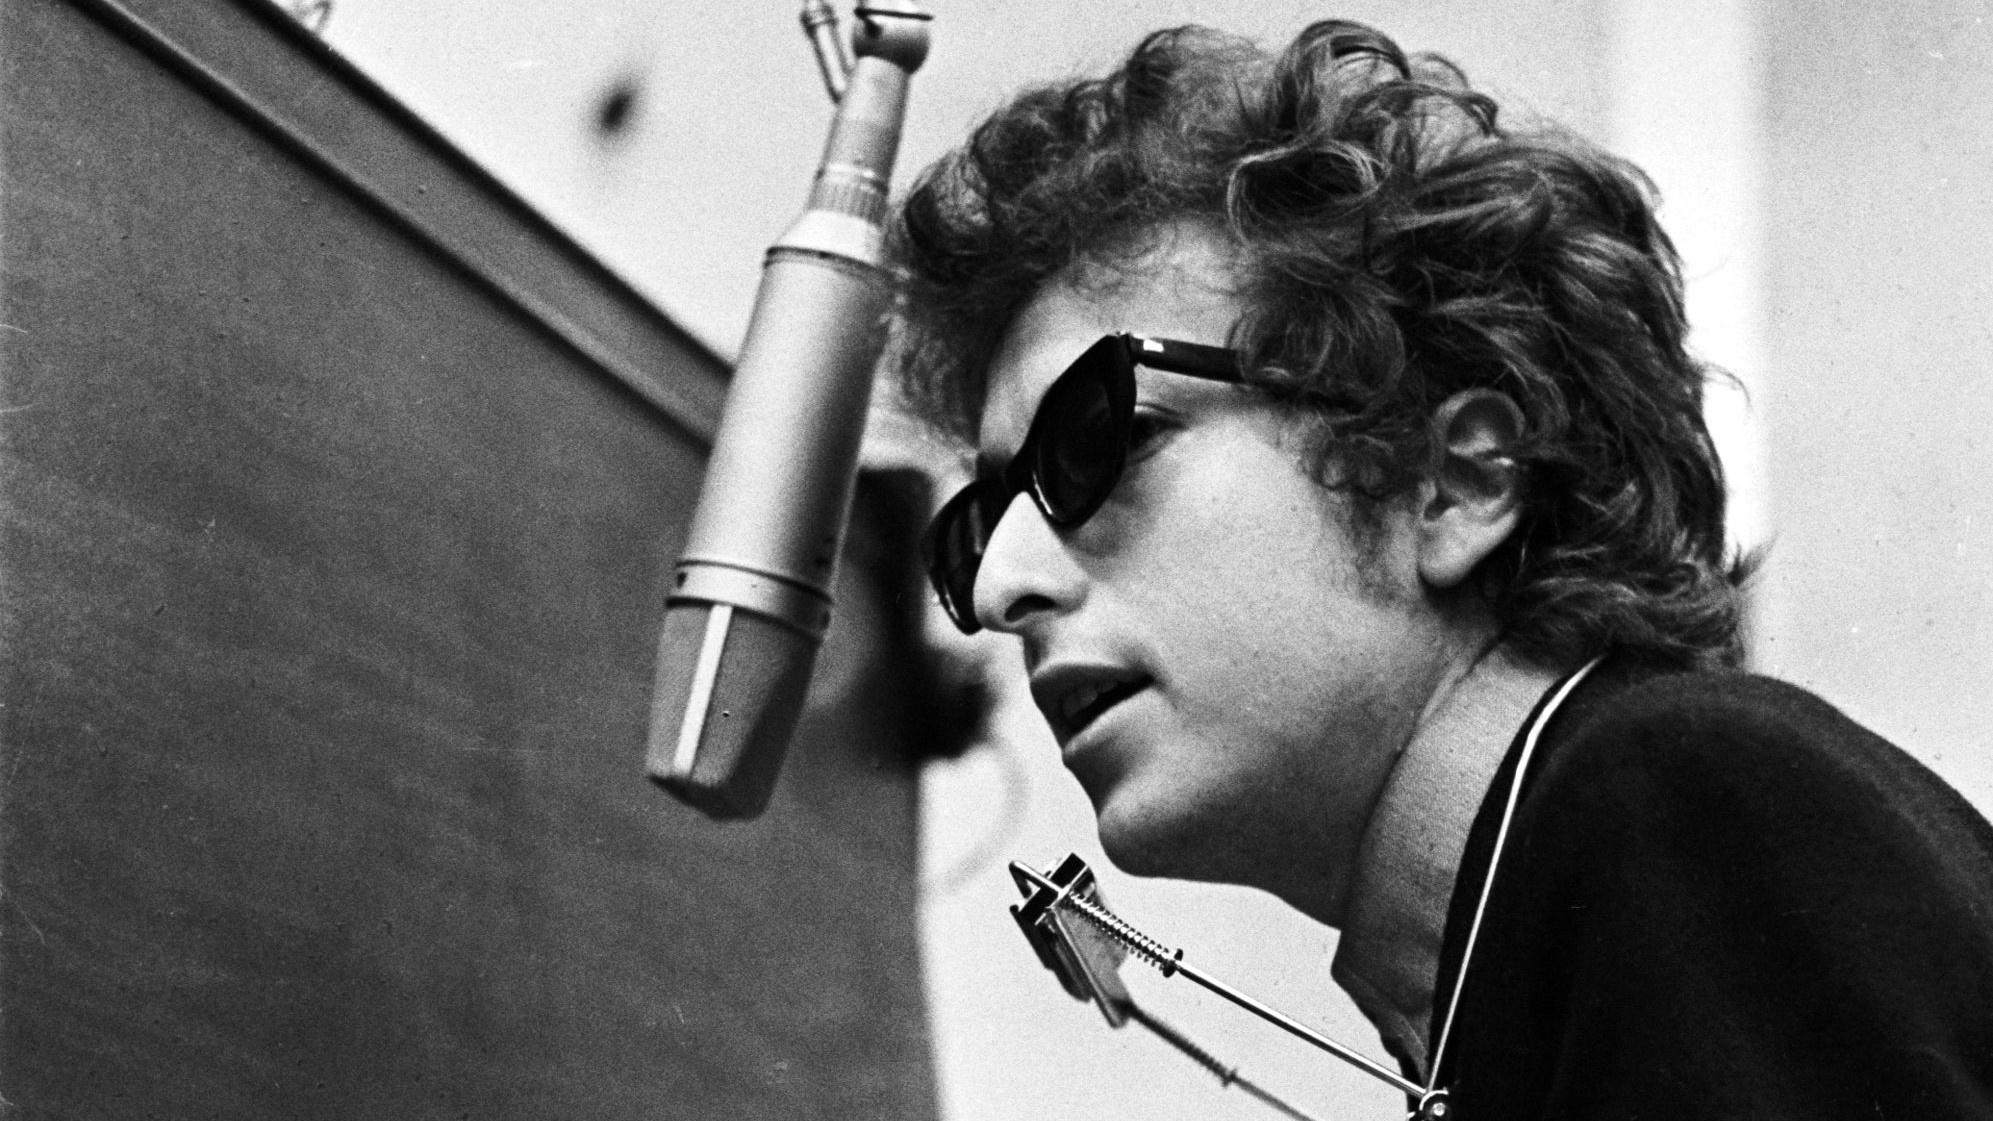 A young Bob Dylan wearing sunglasses with harmonica and microphone